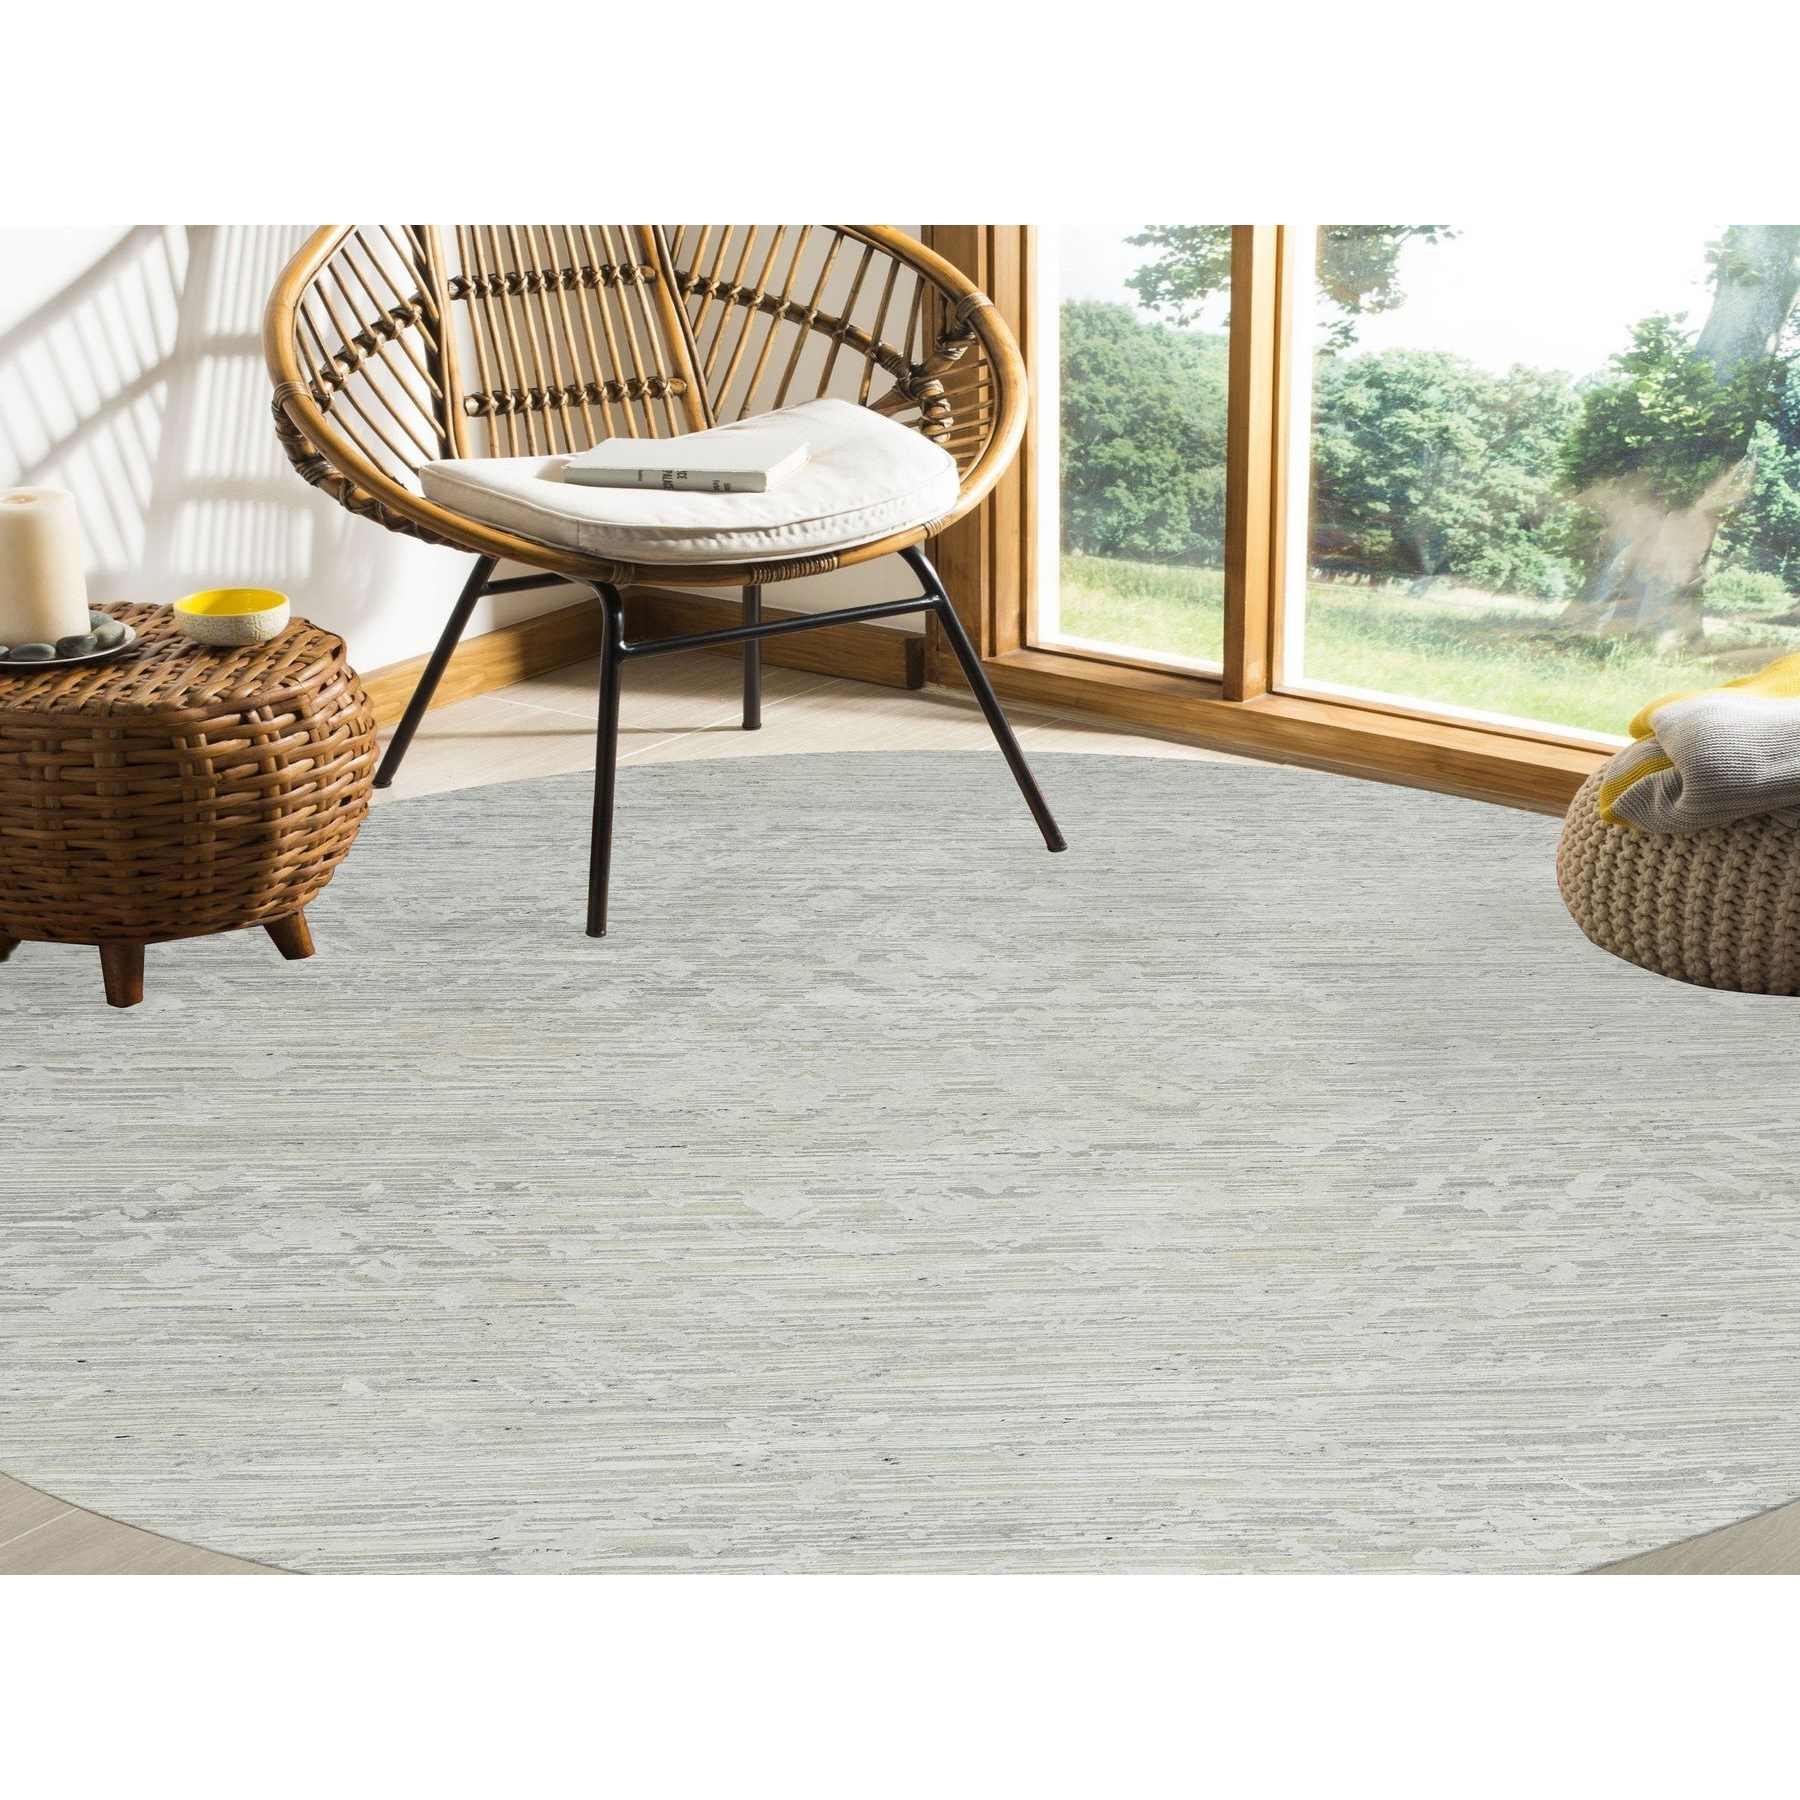 Modern-and-Contemporary-Hand-Knotted-Rug-323490